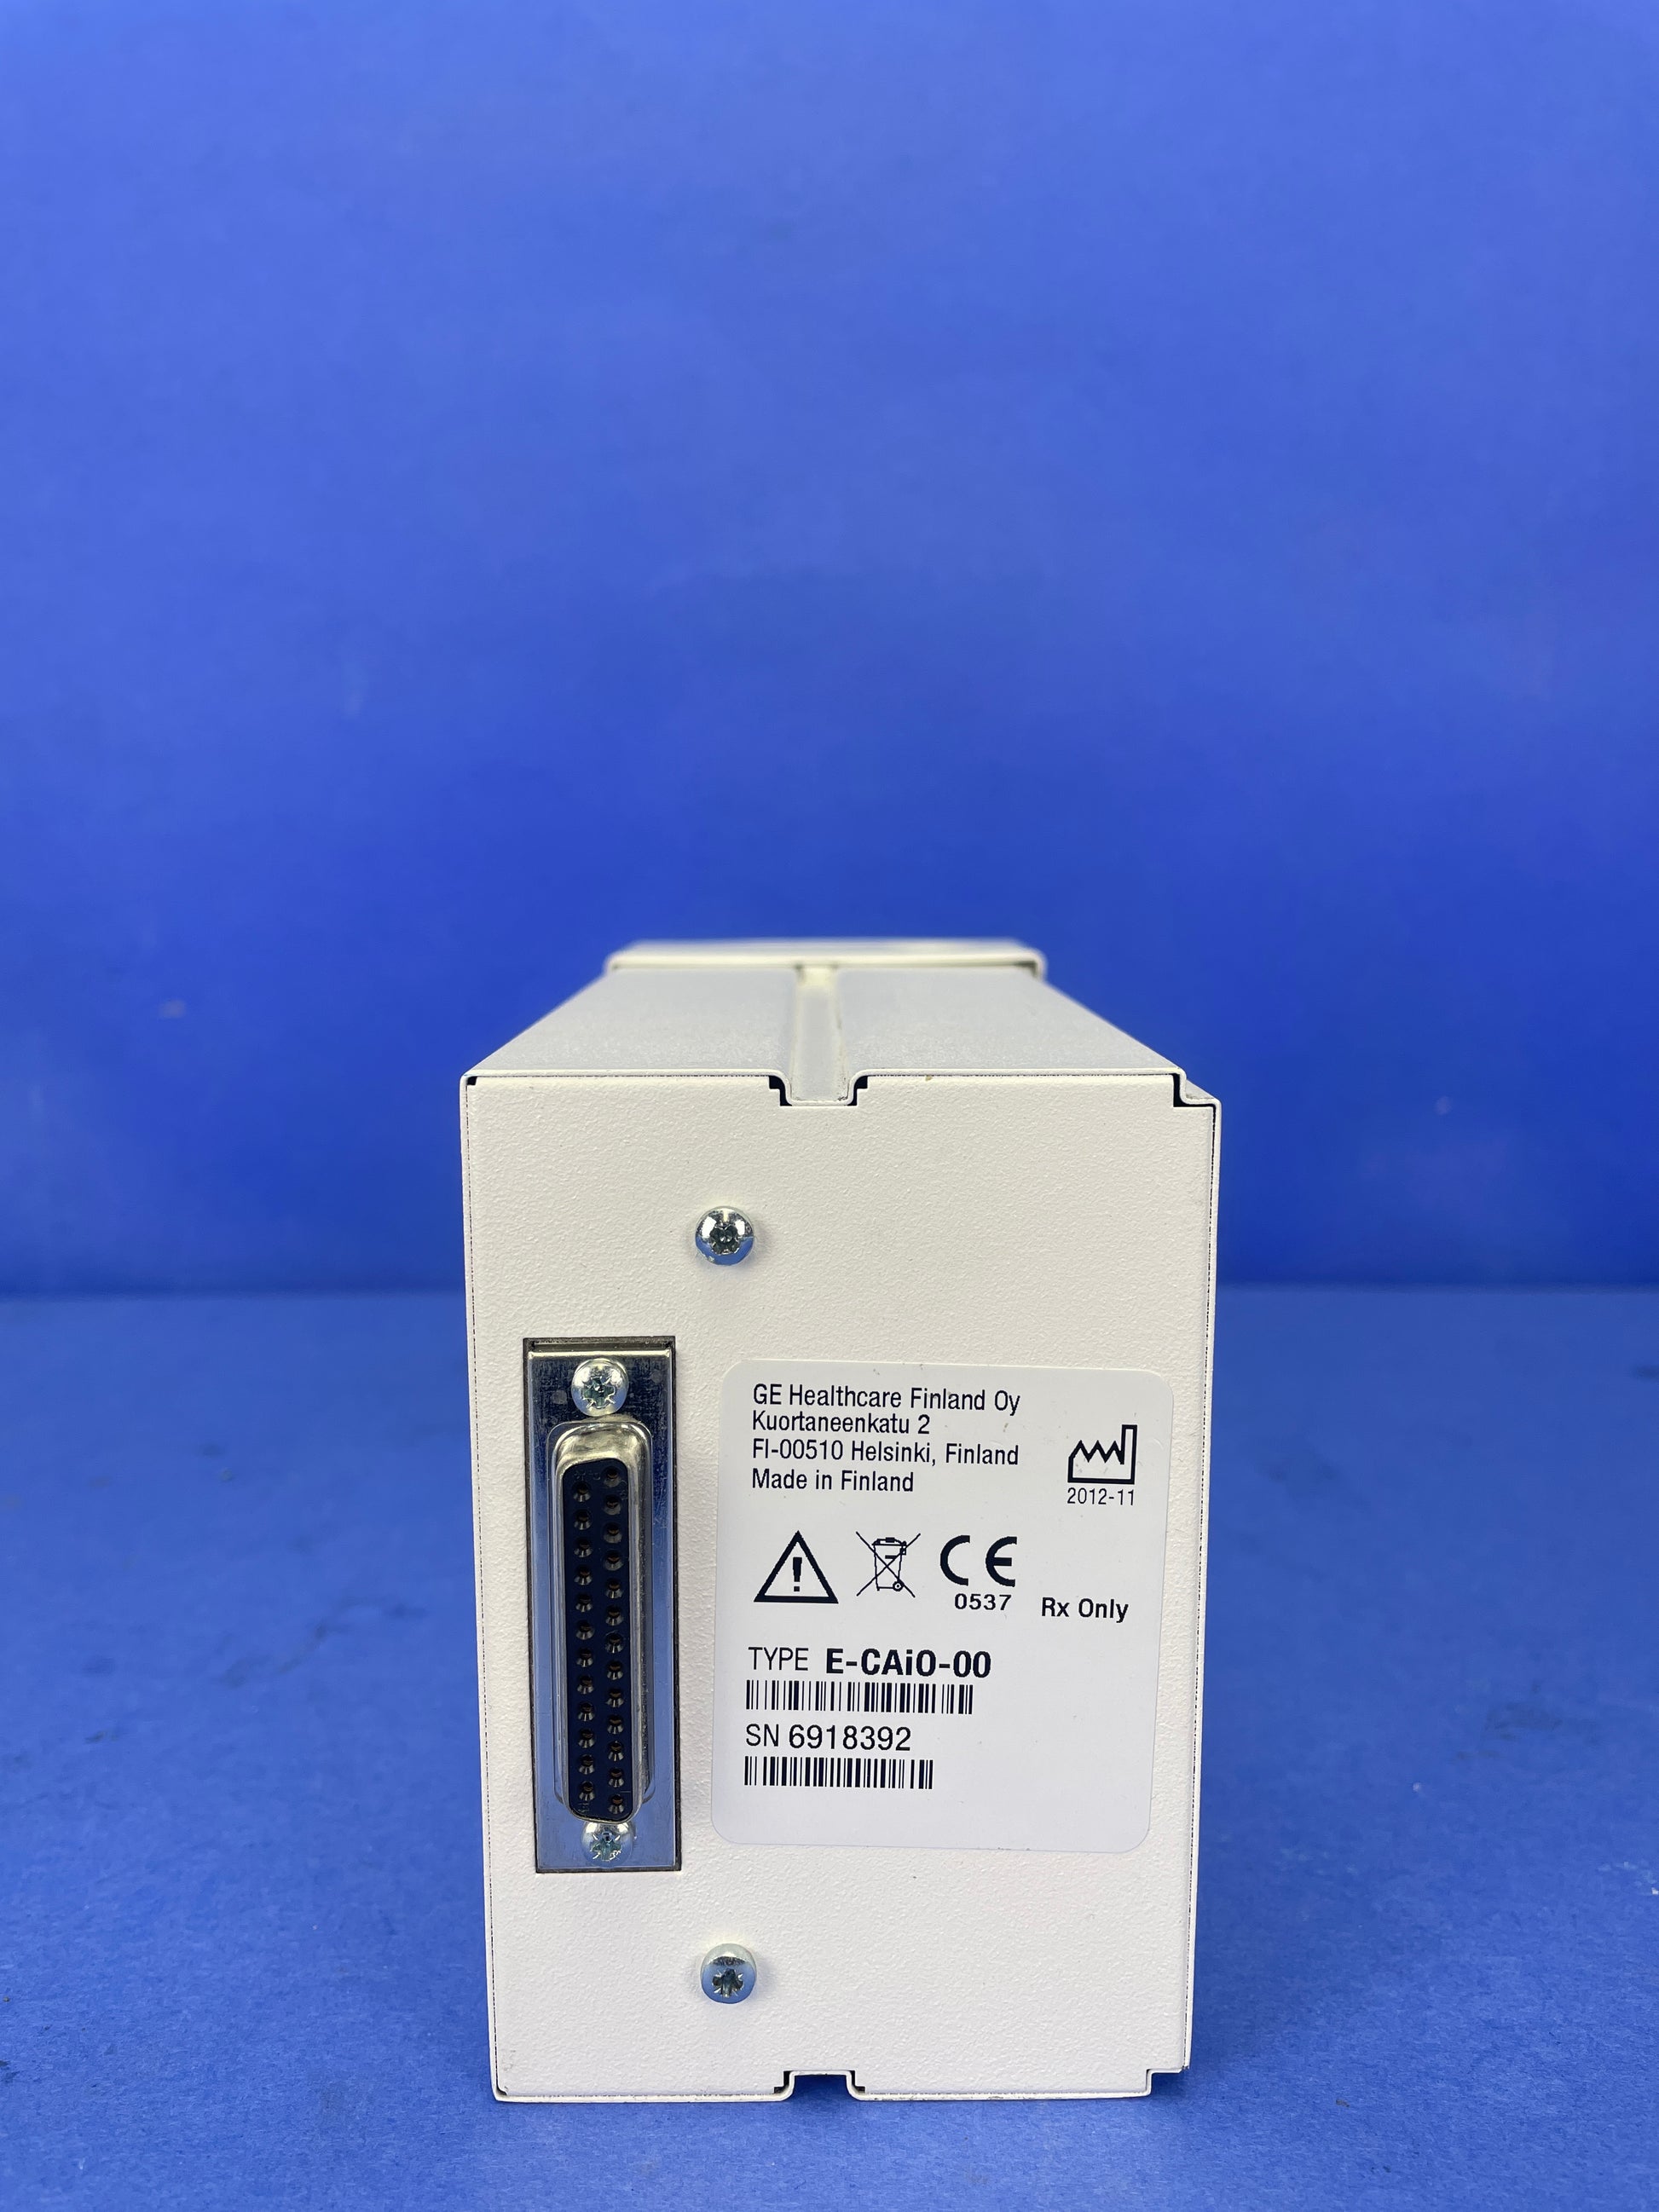 This CARESCAPE Module E-CAIO is a 5 Agent Gas Module used with GE Datex Ohmeda Monitors S5 and other Compact GE Monitors. This Module is designed to measure Oxygen O2, CO2, N2O, Patient Spirometry, and 5 Anesthetic Agents.